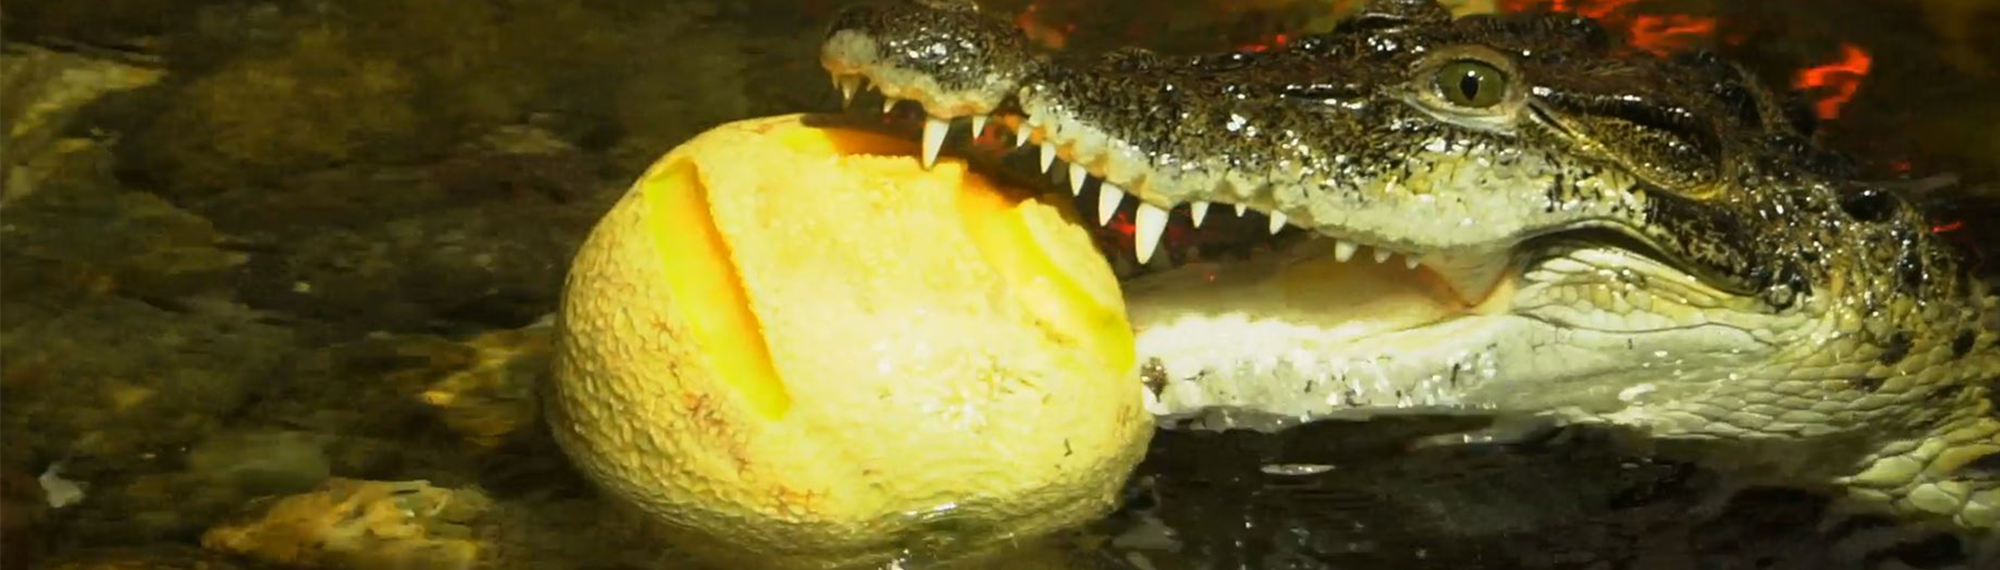 Luzon the Philippines Crocodile, on his birthday, with a cantaloupe in his mouth  